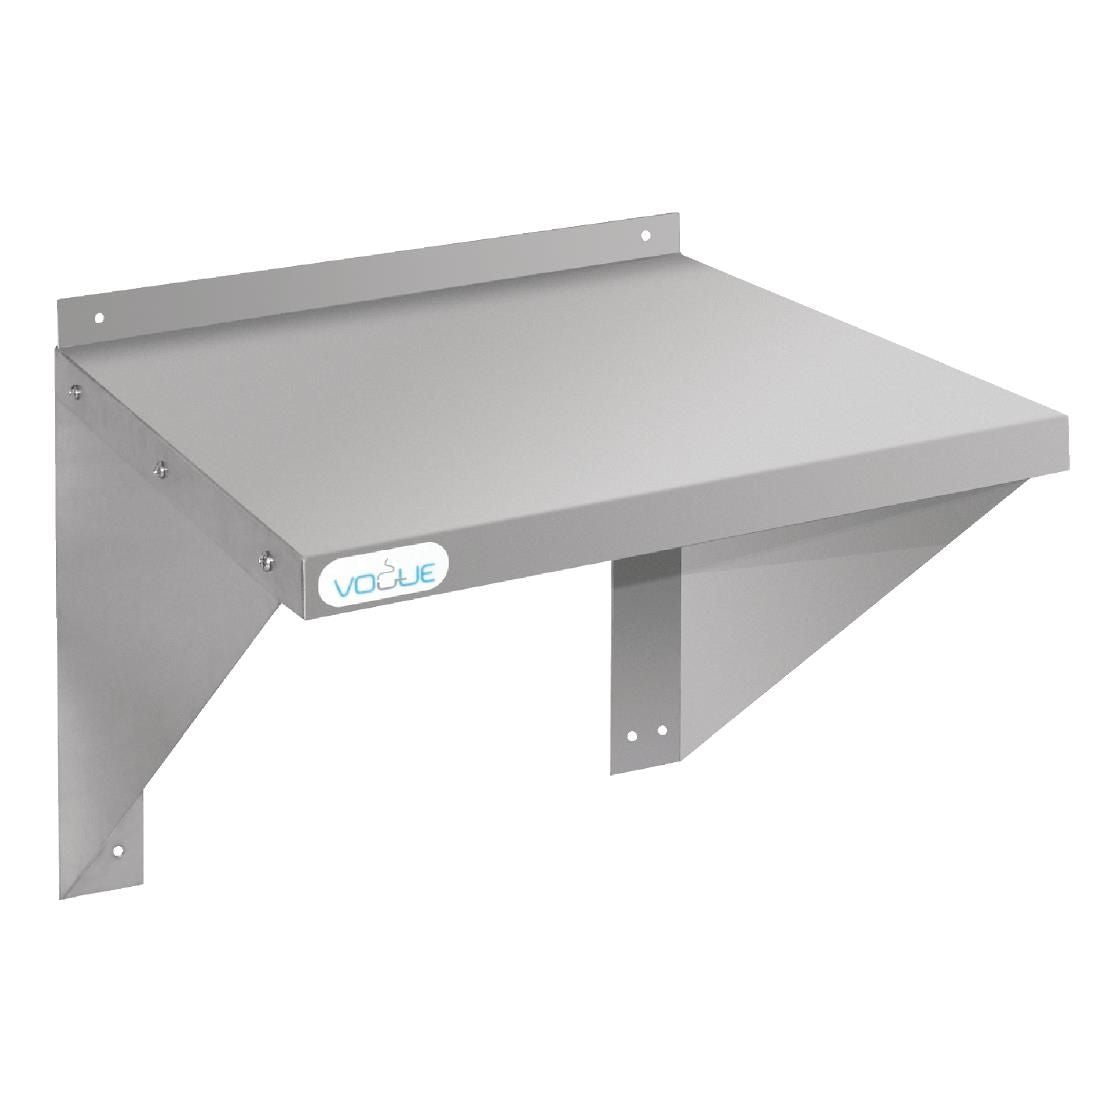 CD550 Vogue Stainless Steel Microwave Shelf